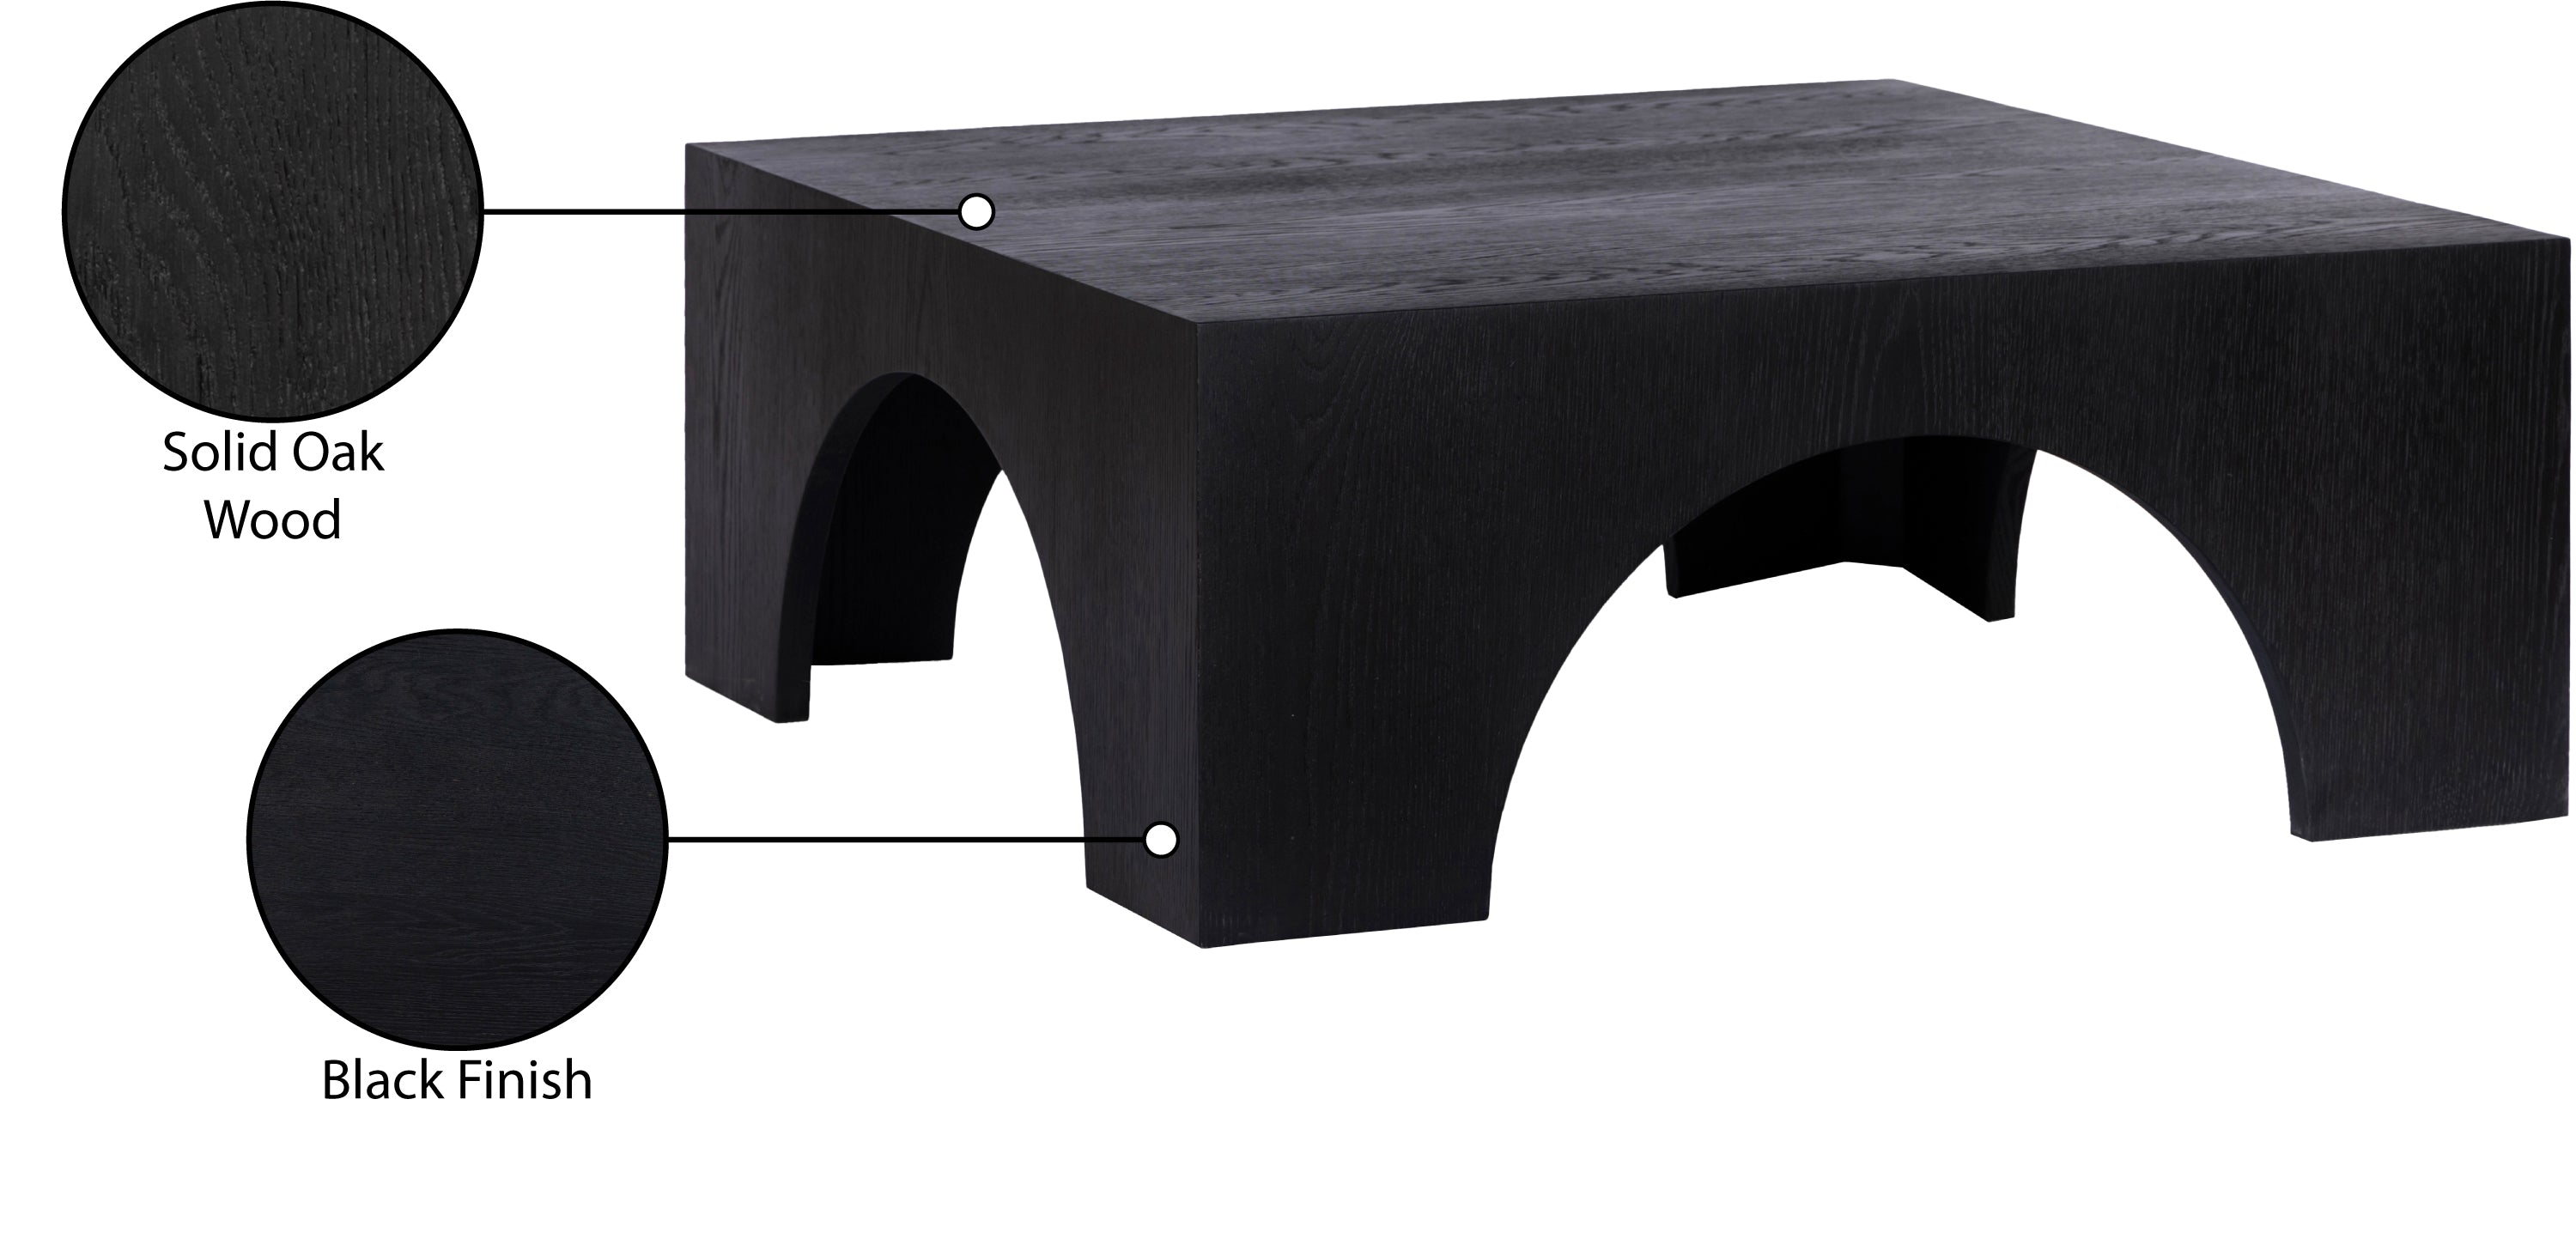 Arch Coffee Table - Black